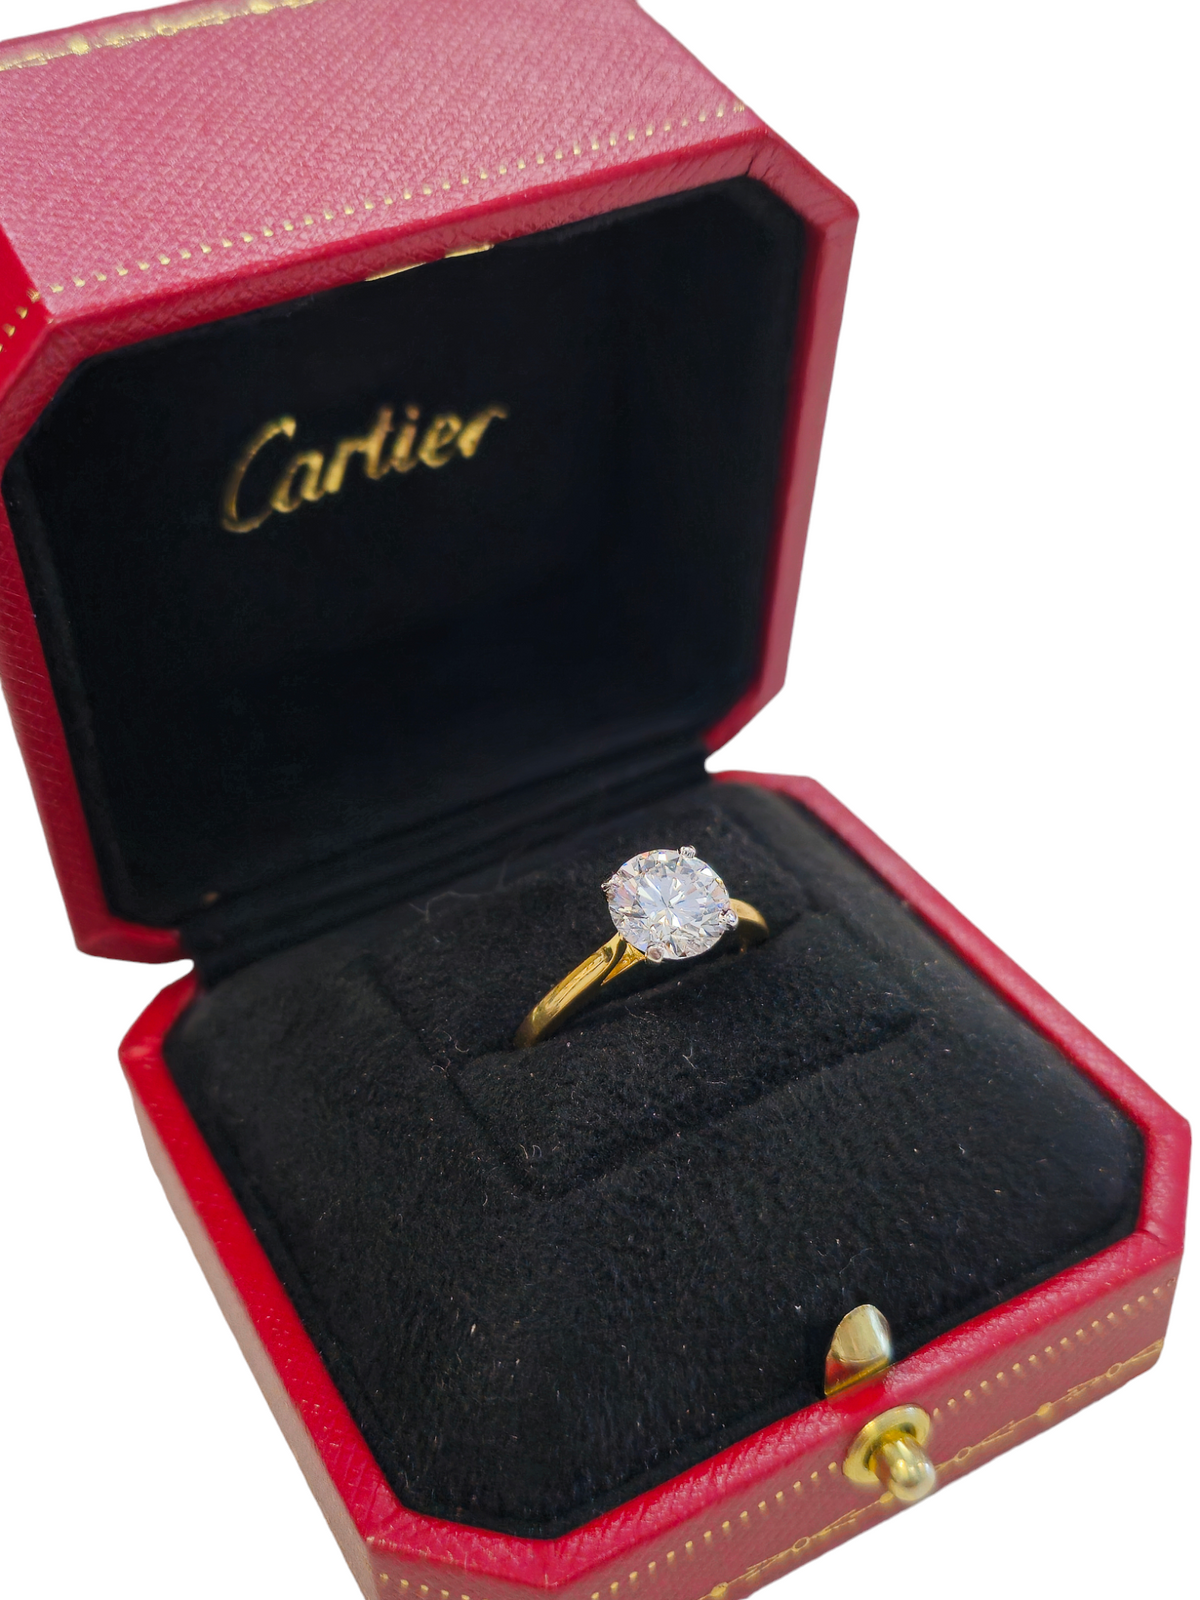 Authentic Cartier Diamond Solitaire ring made in Platinum and 18-karat yellow gold